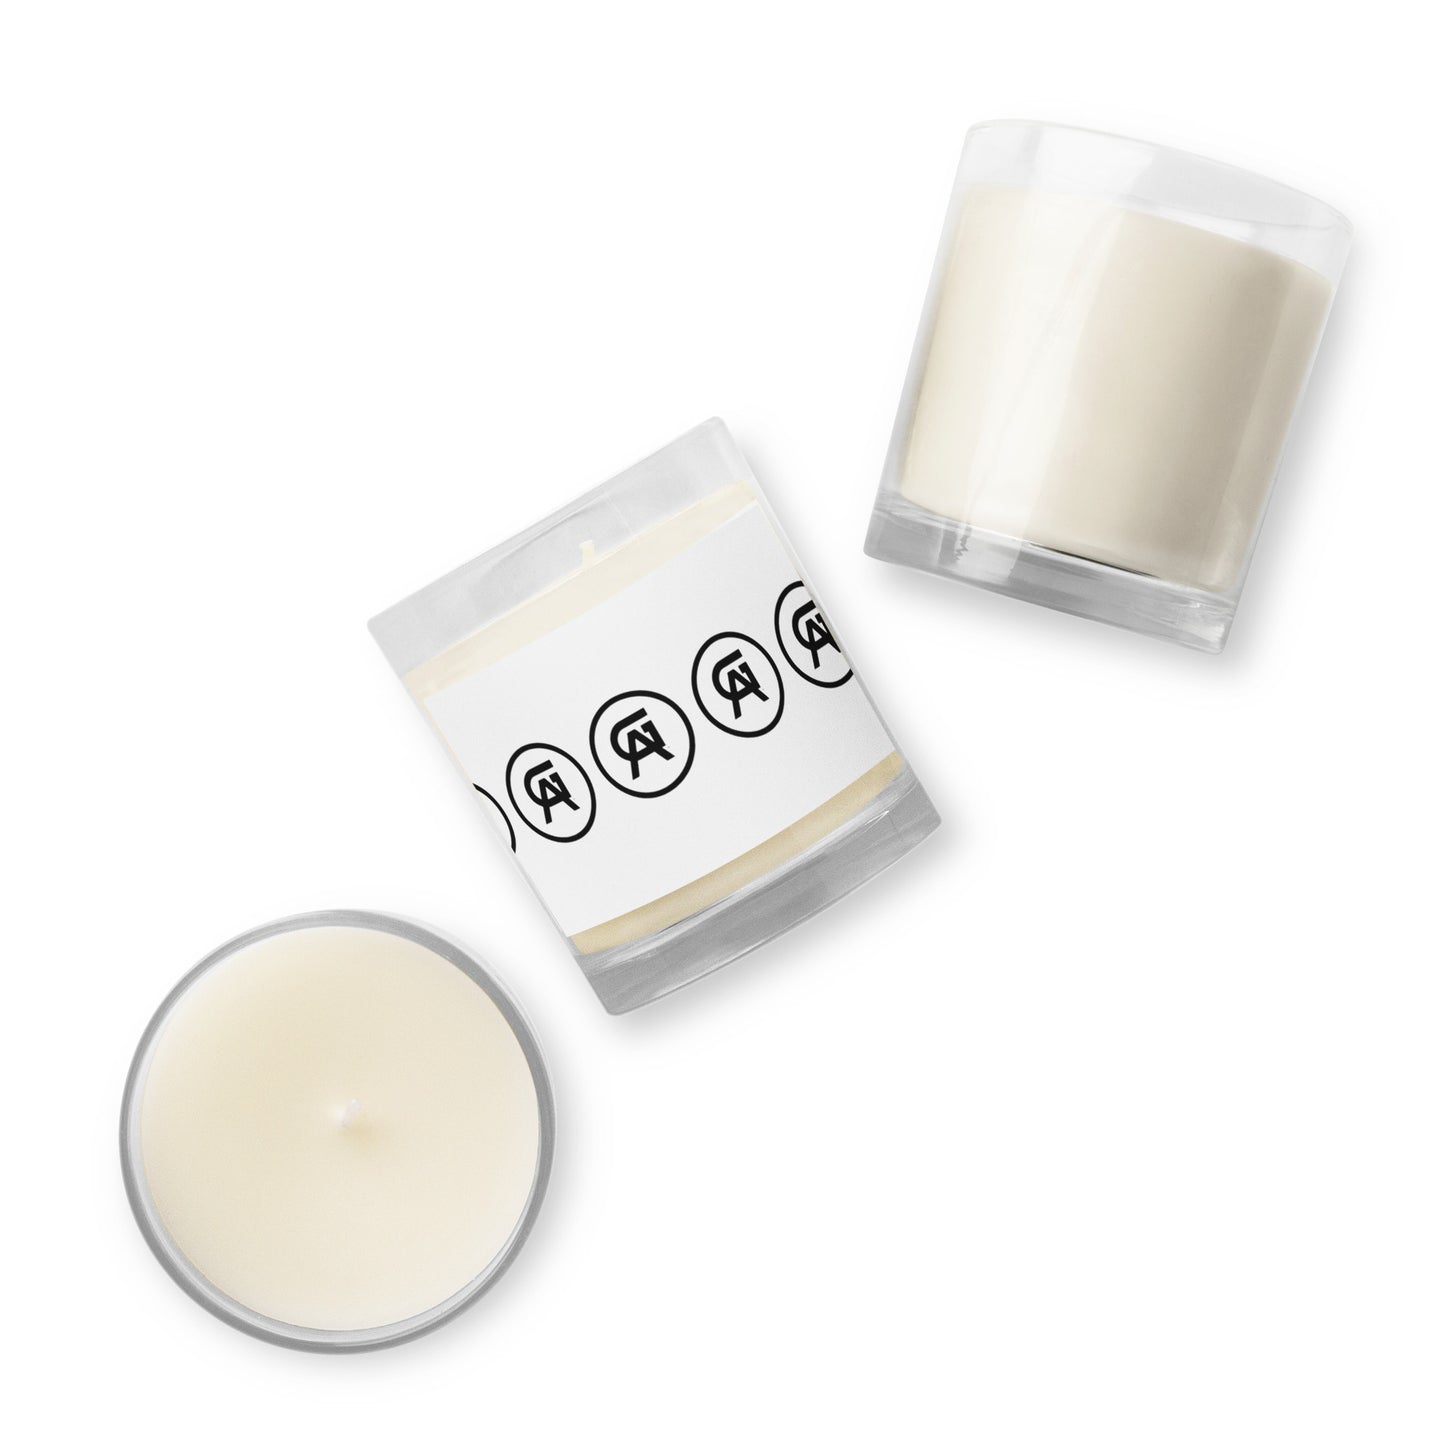 GA Wax Candle (Unscented)